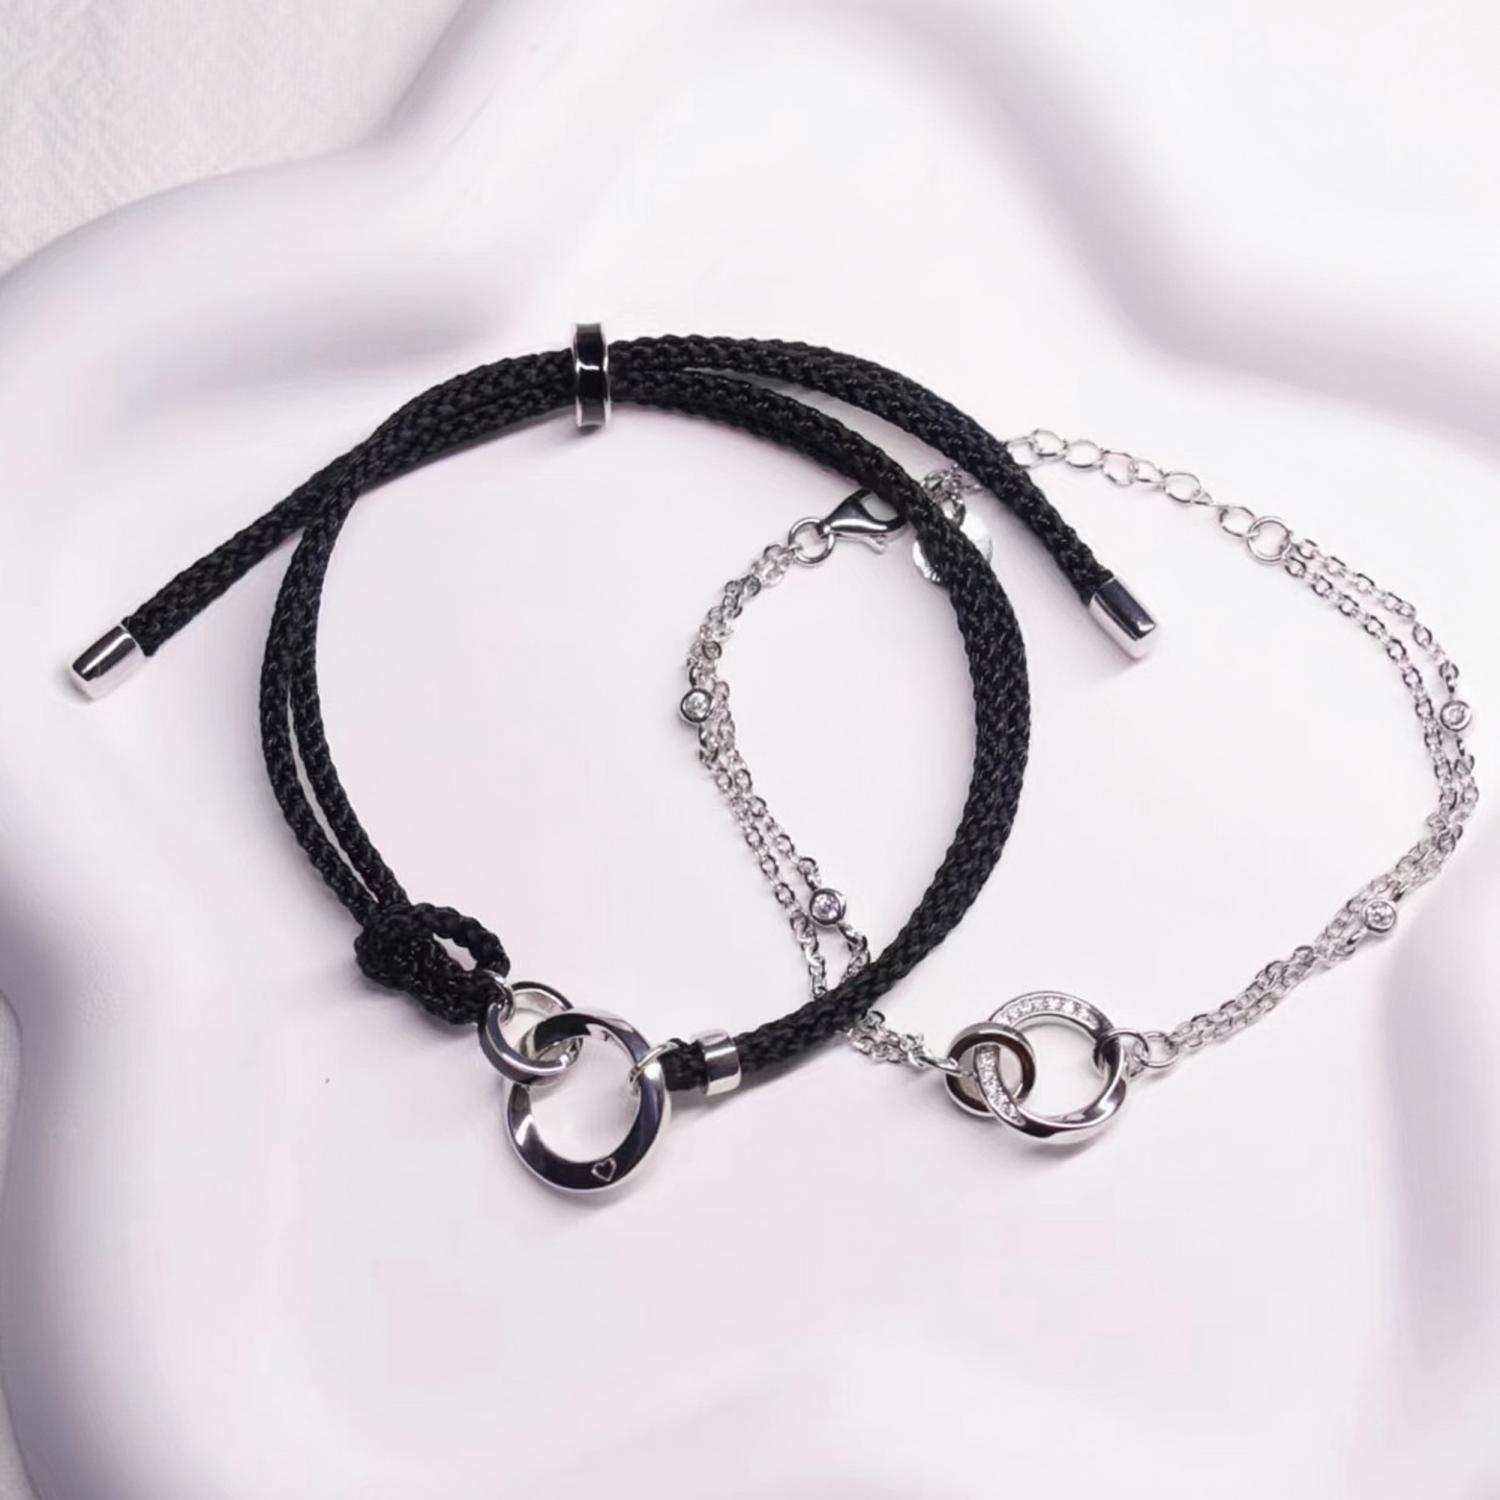 Unique Infinity Knot Matching Couple Bracelets In Sterling Silver - CoupleSets